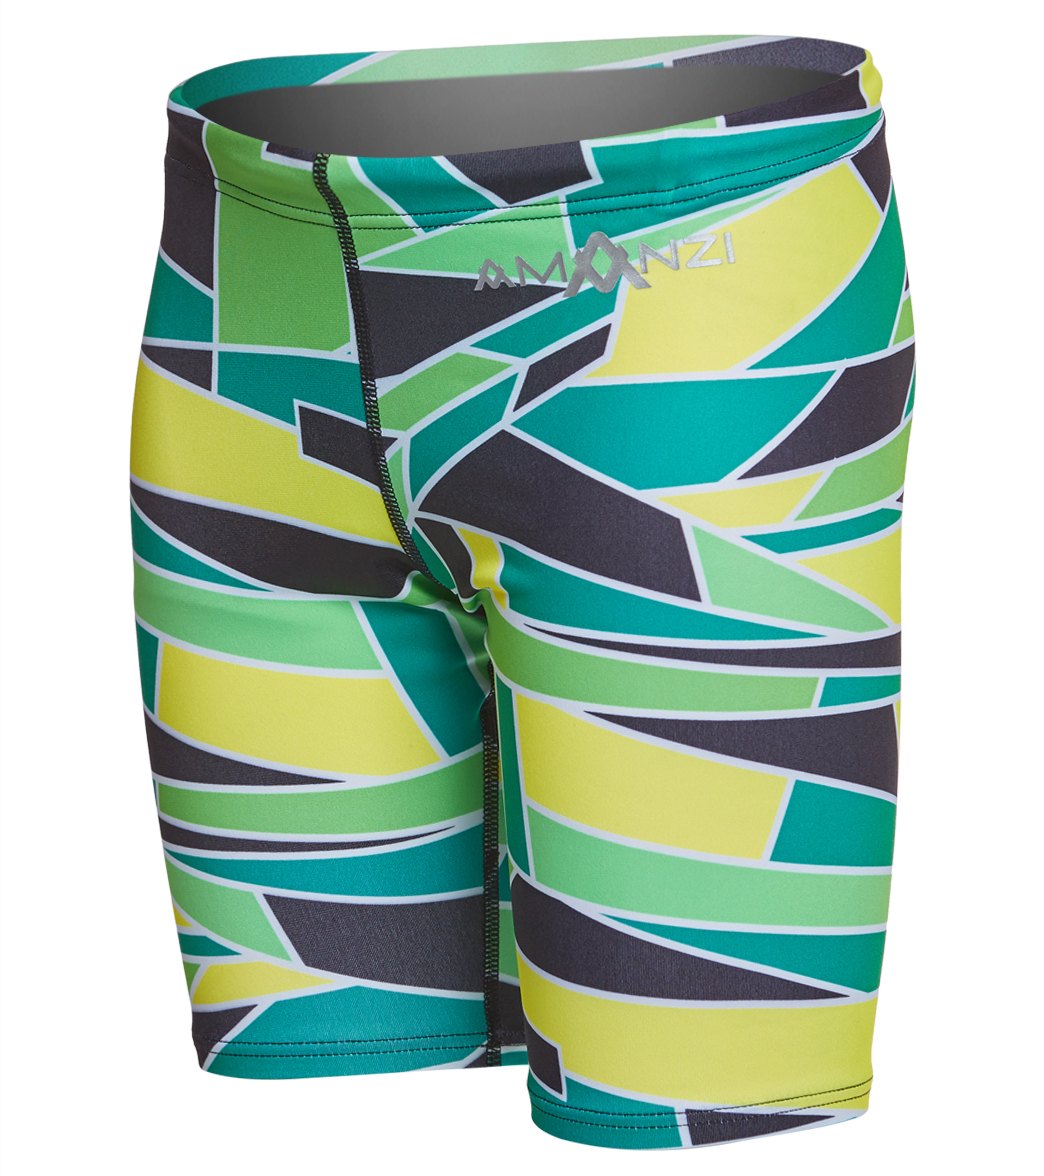 Amanzi Boys' Chaos Jammer Swimsuit at SwimOutlet.com